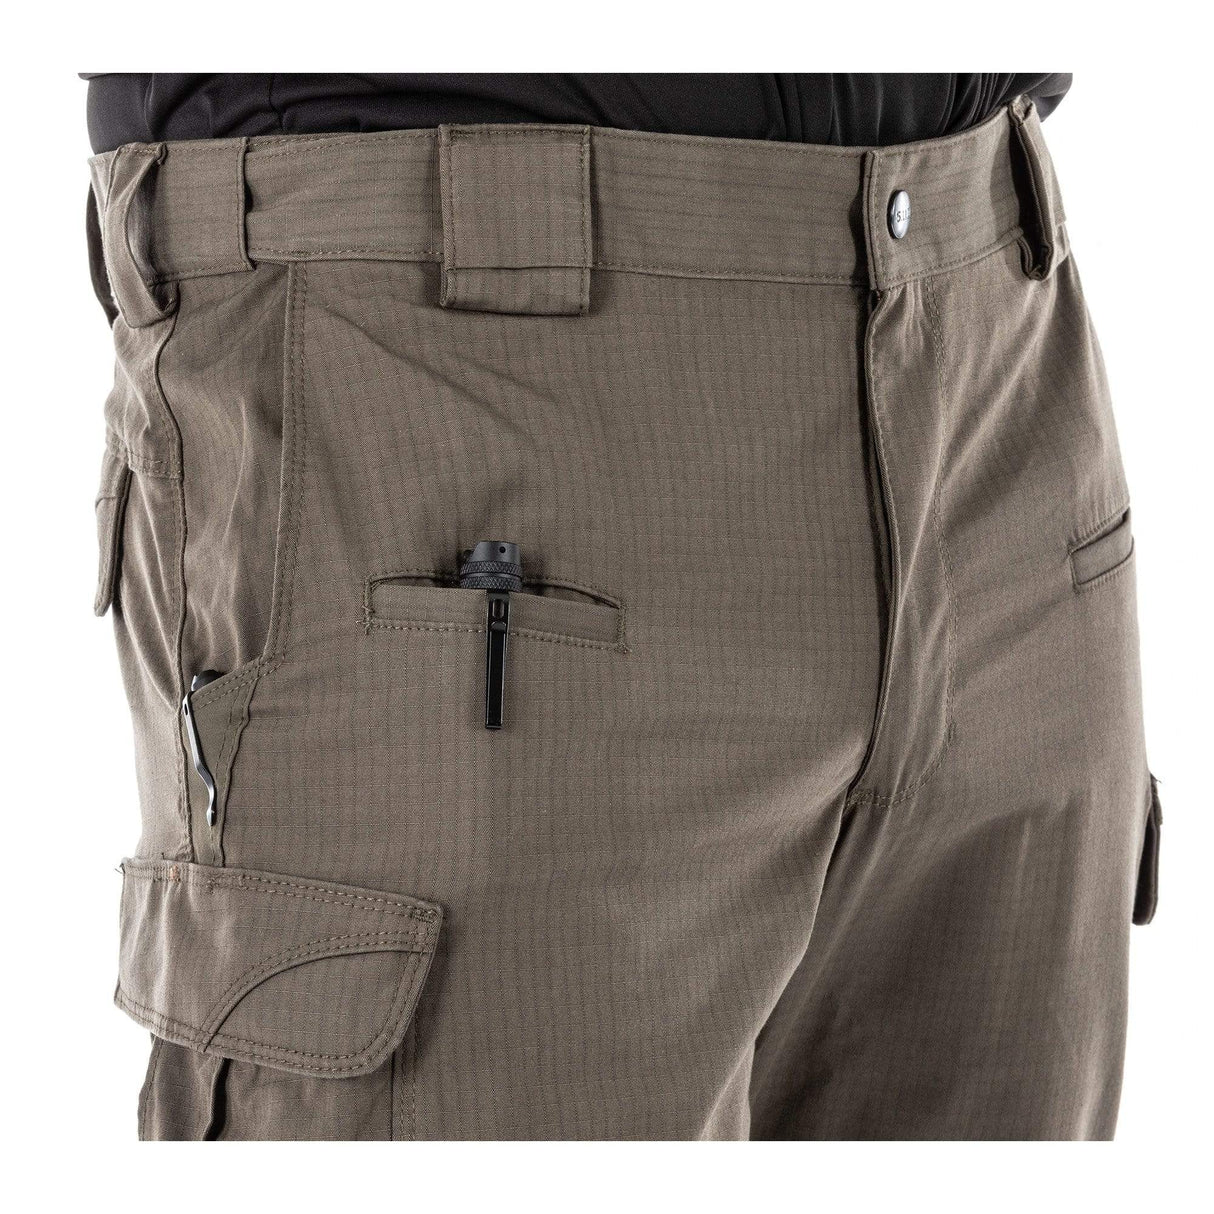 STRYKE® PANT BLACK - 5.11 Tactical Finland Store